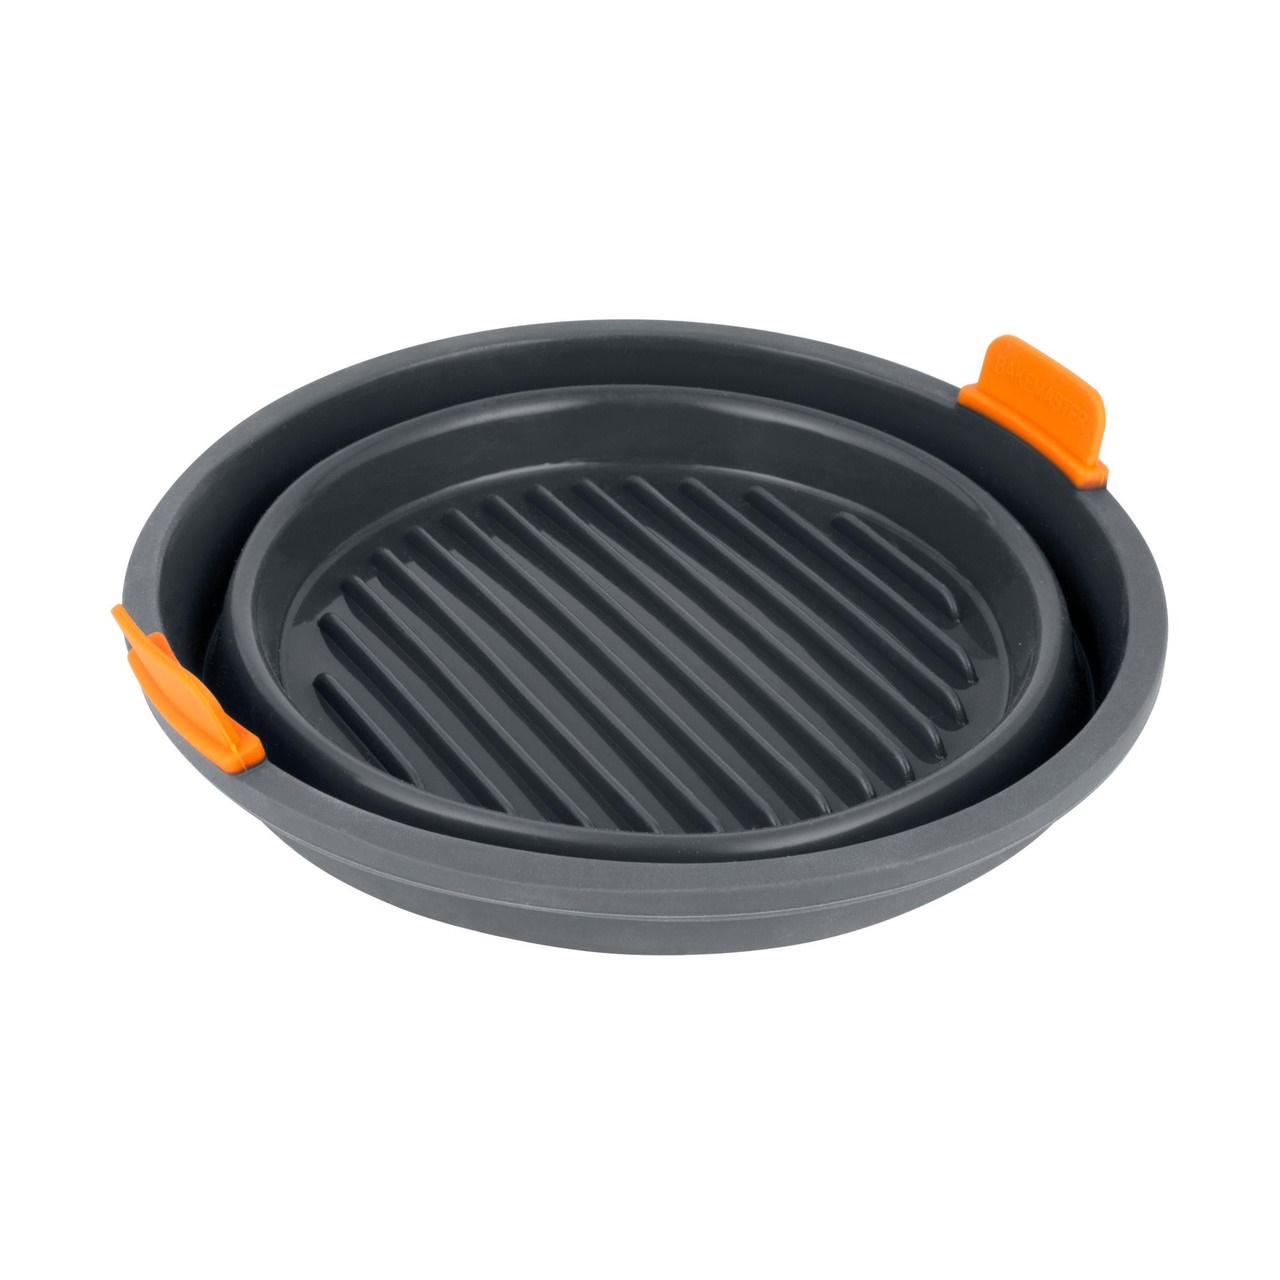 Bakemaster Silicone Collapsible Round Air Fryer Insert 21 X 6.5cm